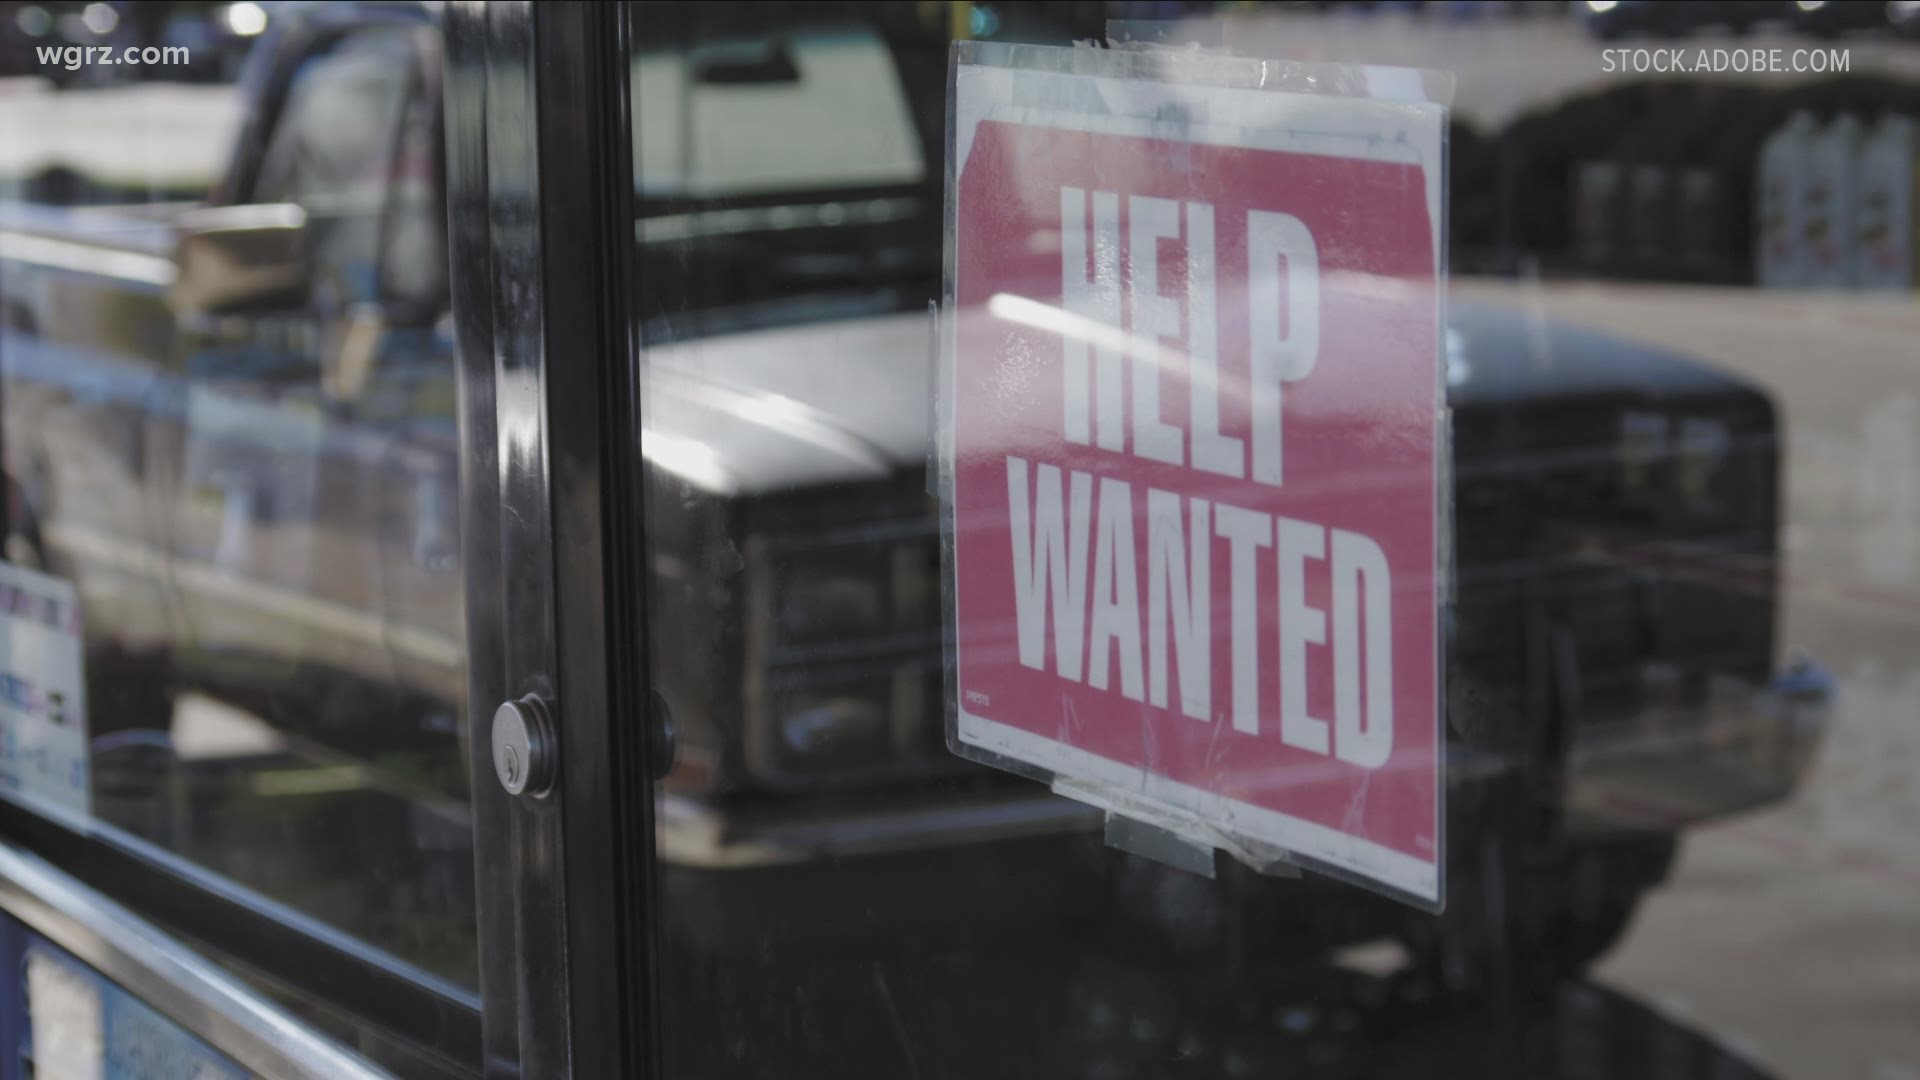 A recent national survey showed 42 percent of small business owners couldn't fill available positions last month.